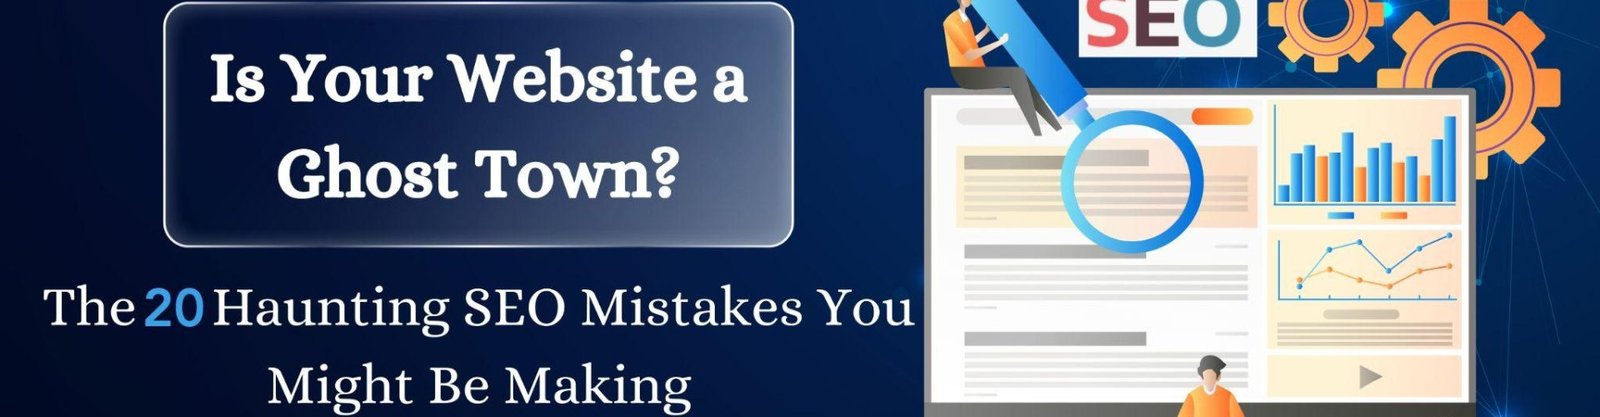 Is Your Website a Ghost Town